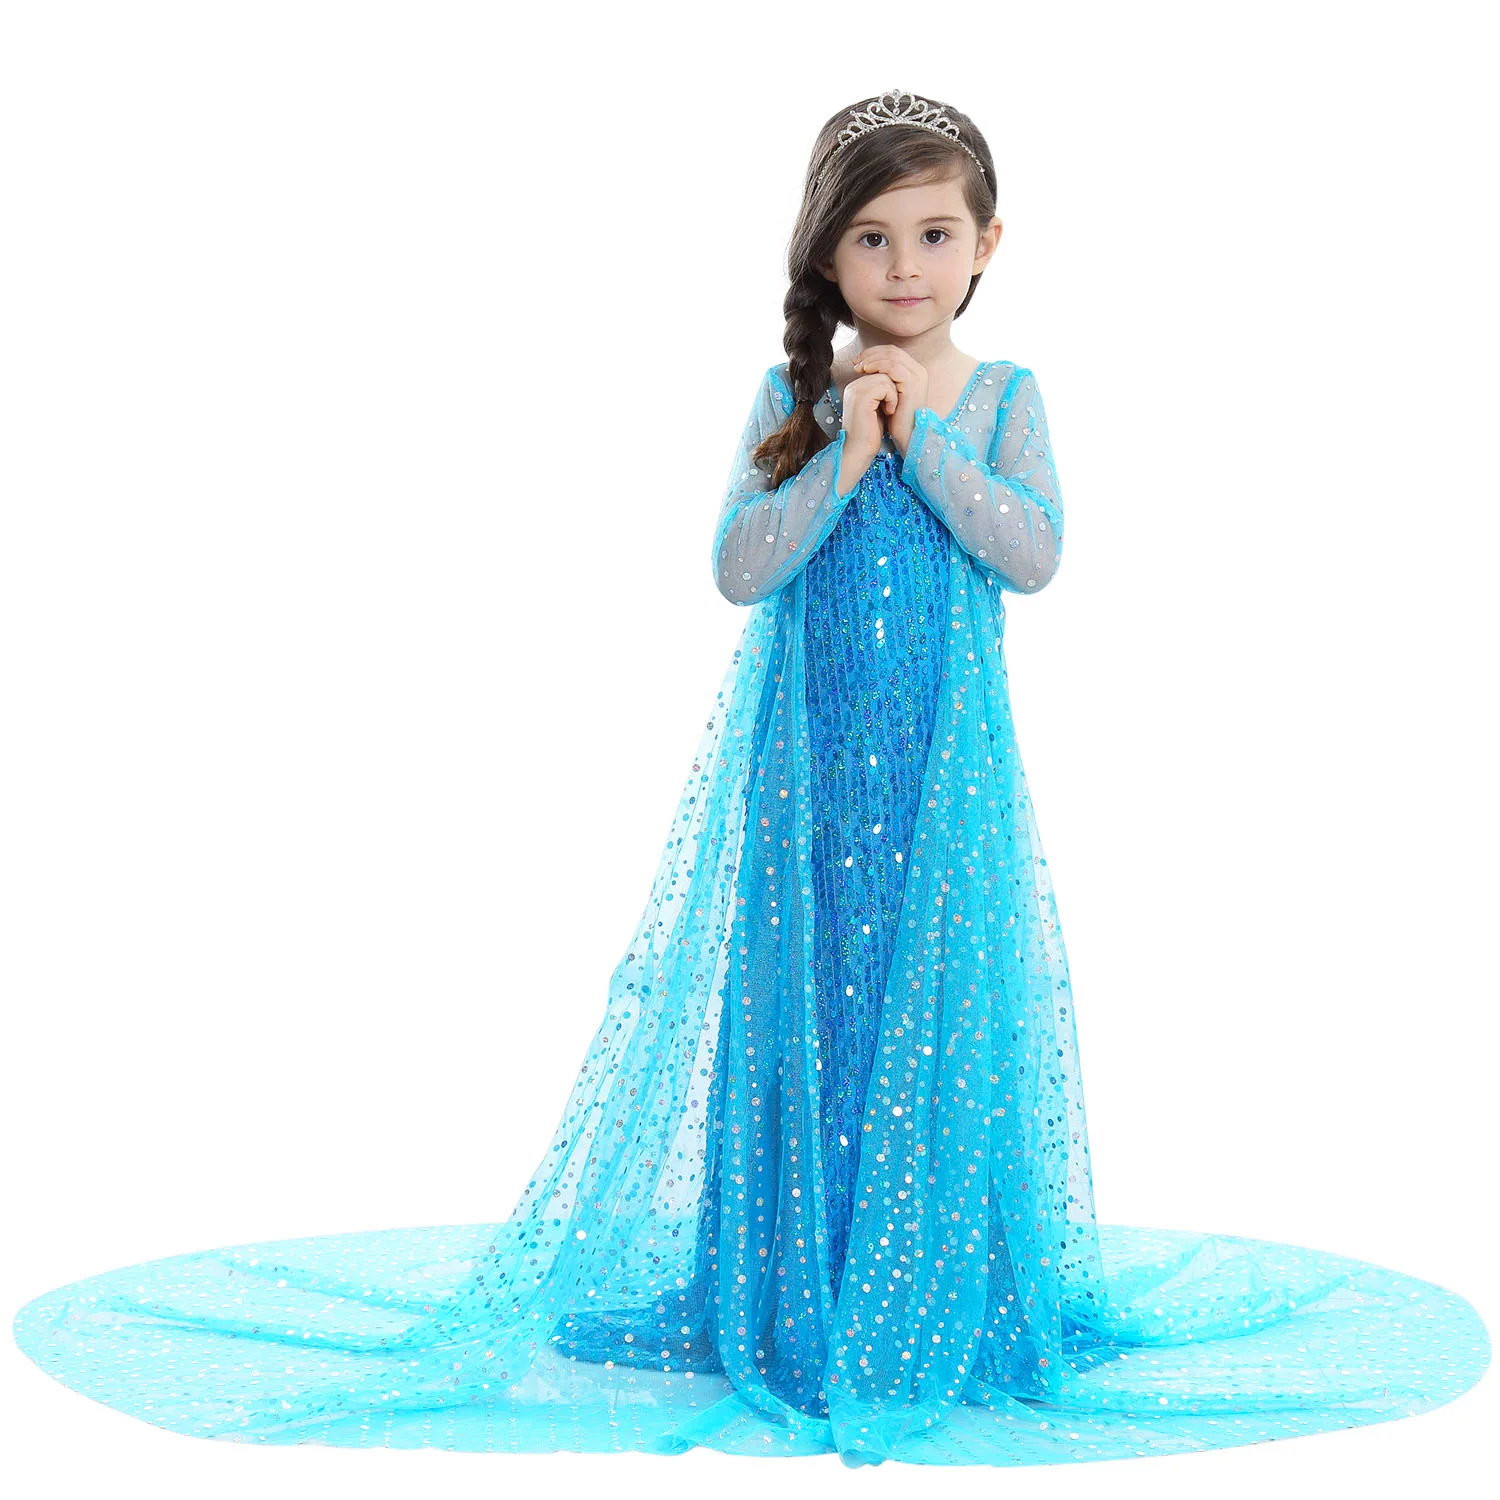 Elsa Kids Princess Party Blue Girls Cosplay Dress Costume Dress Buy Princess Costume Princess Dress For Cosplay Anna Elsa Dress Product On Alibaba Com